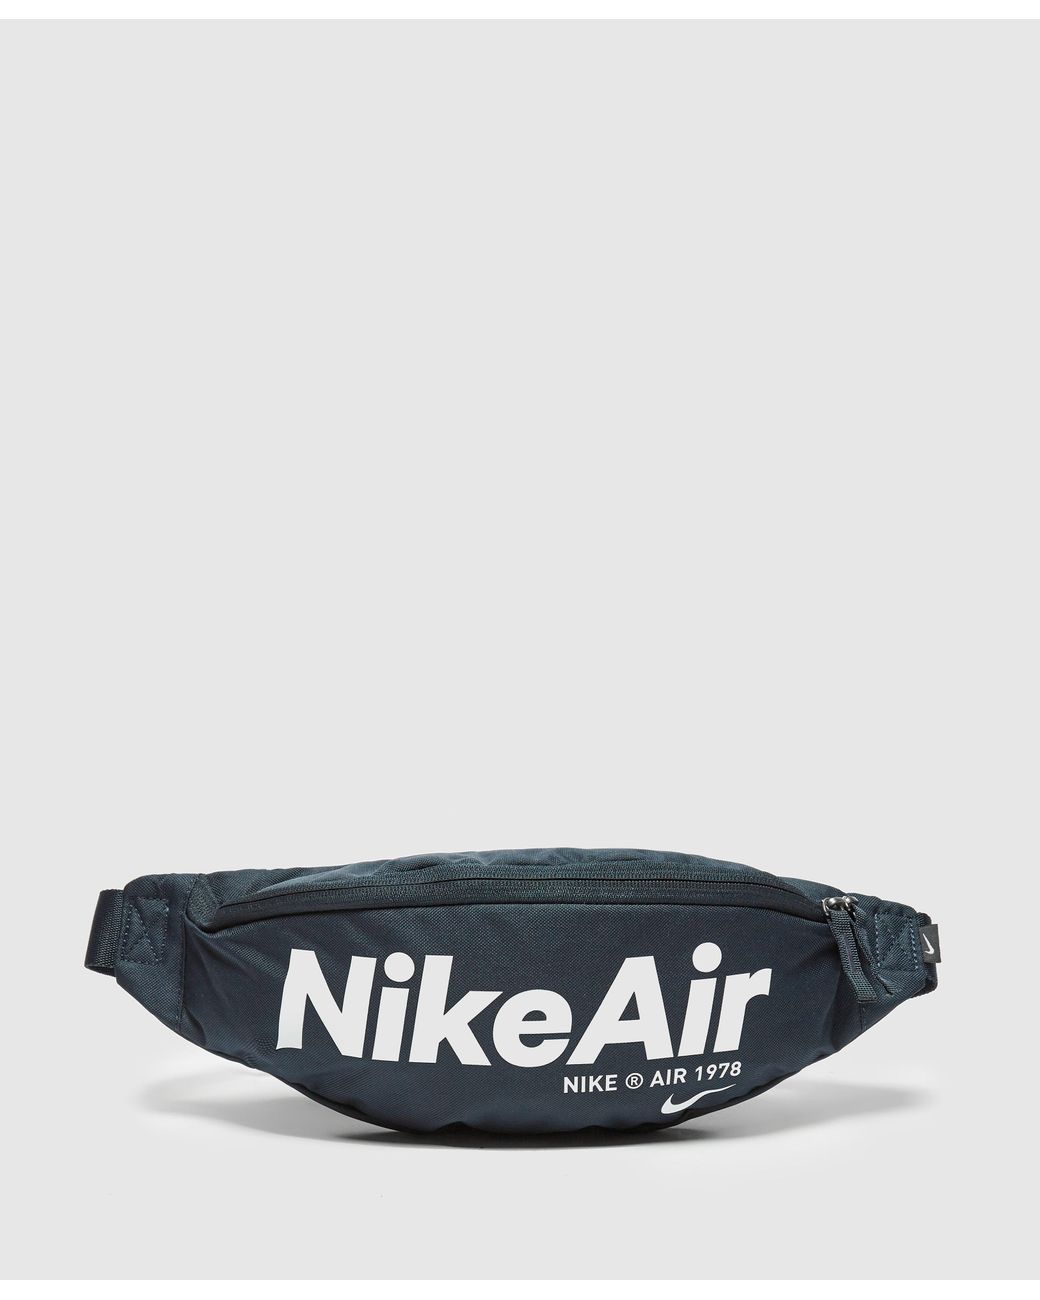 Nike Synthetic Air Waist Bag in Blue 